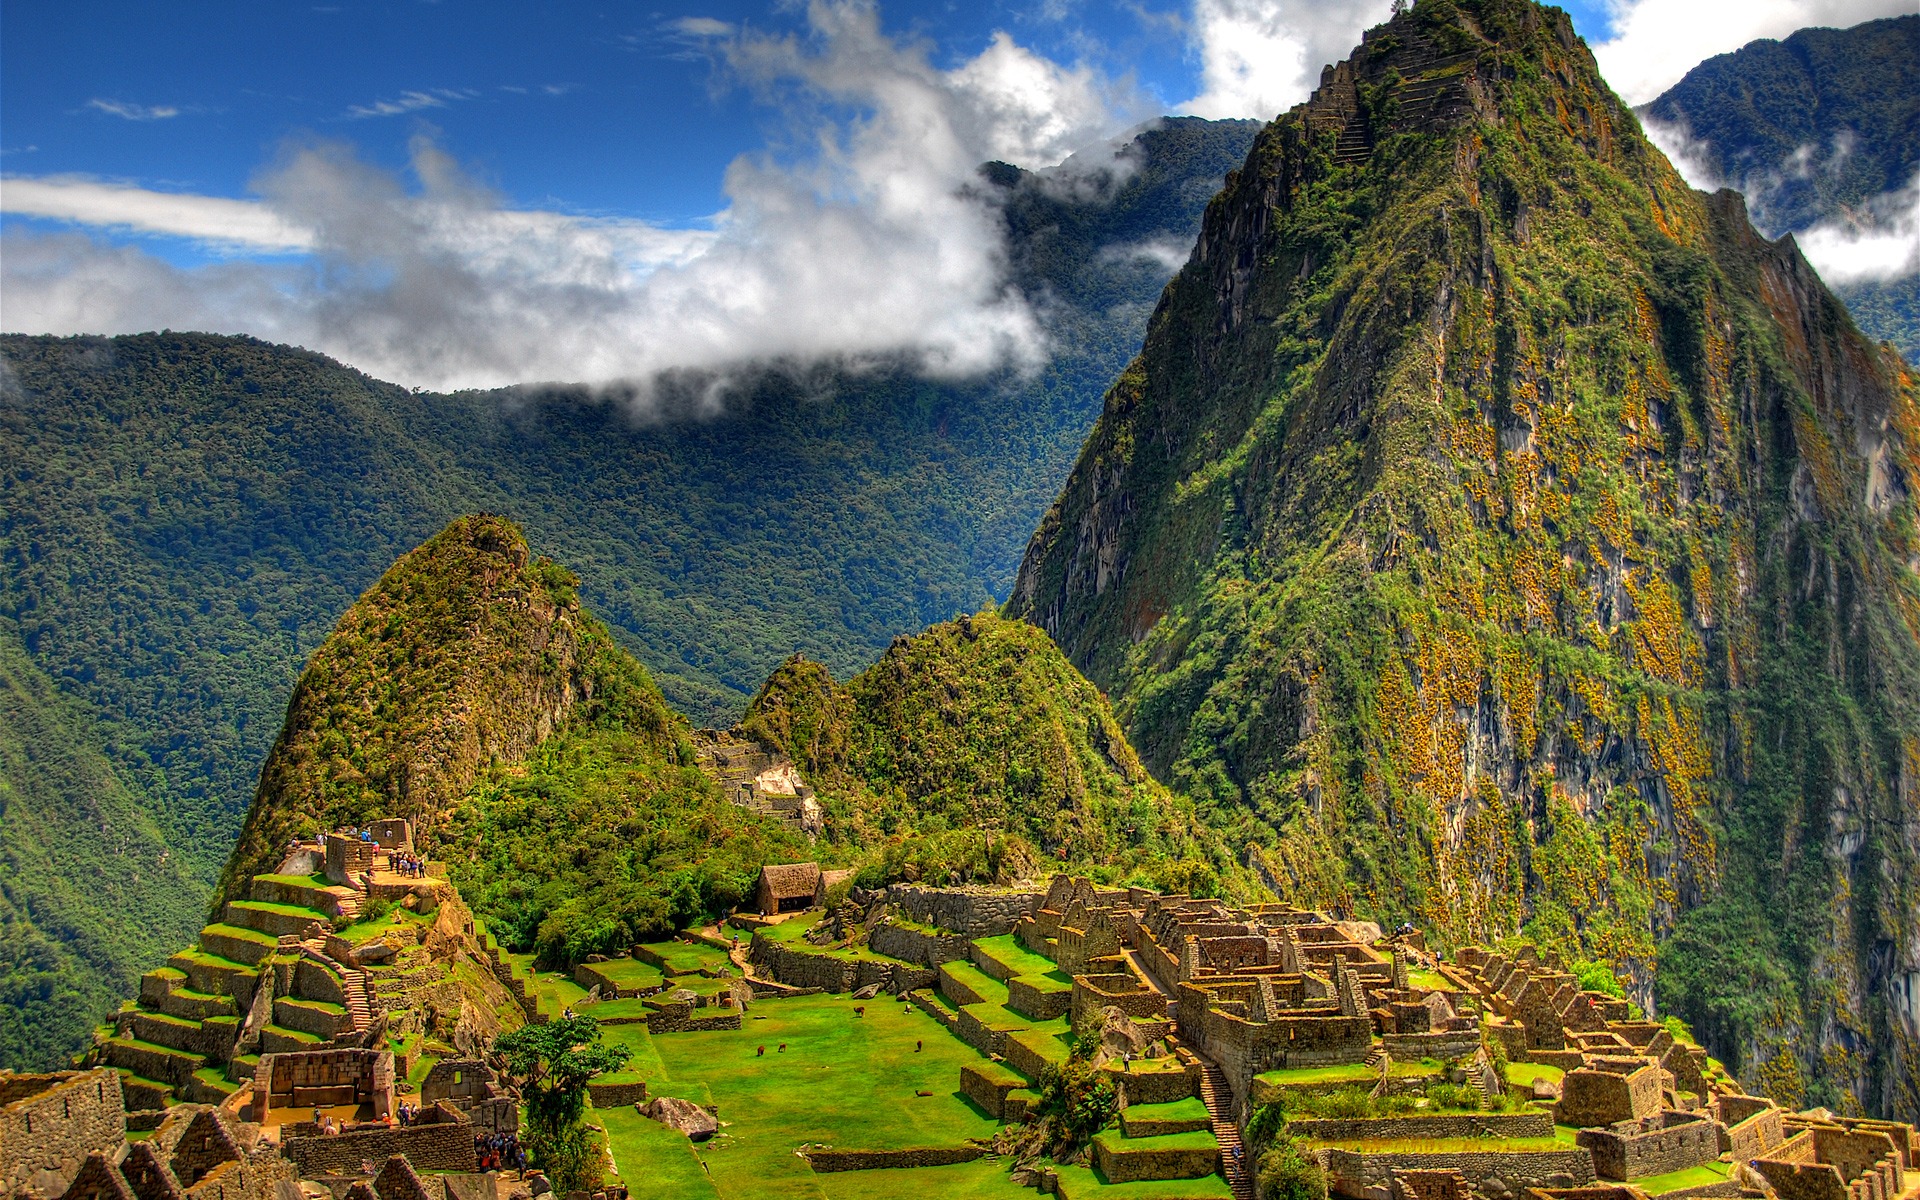 Machu Picchu - Peru, a remarkable man-made marvel surrounded by stunning natural beauty.